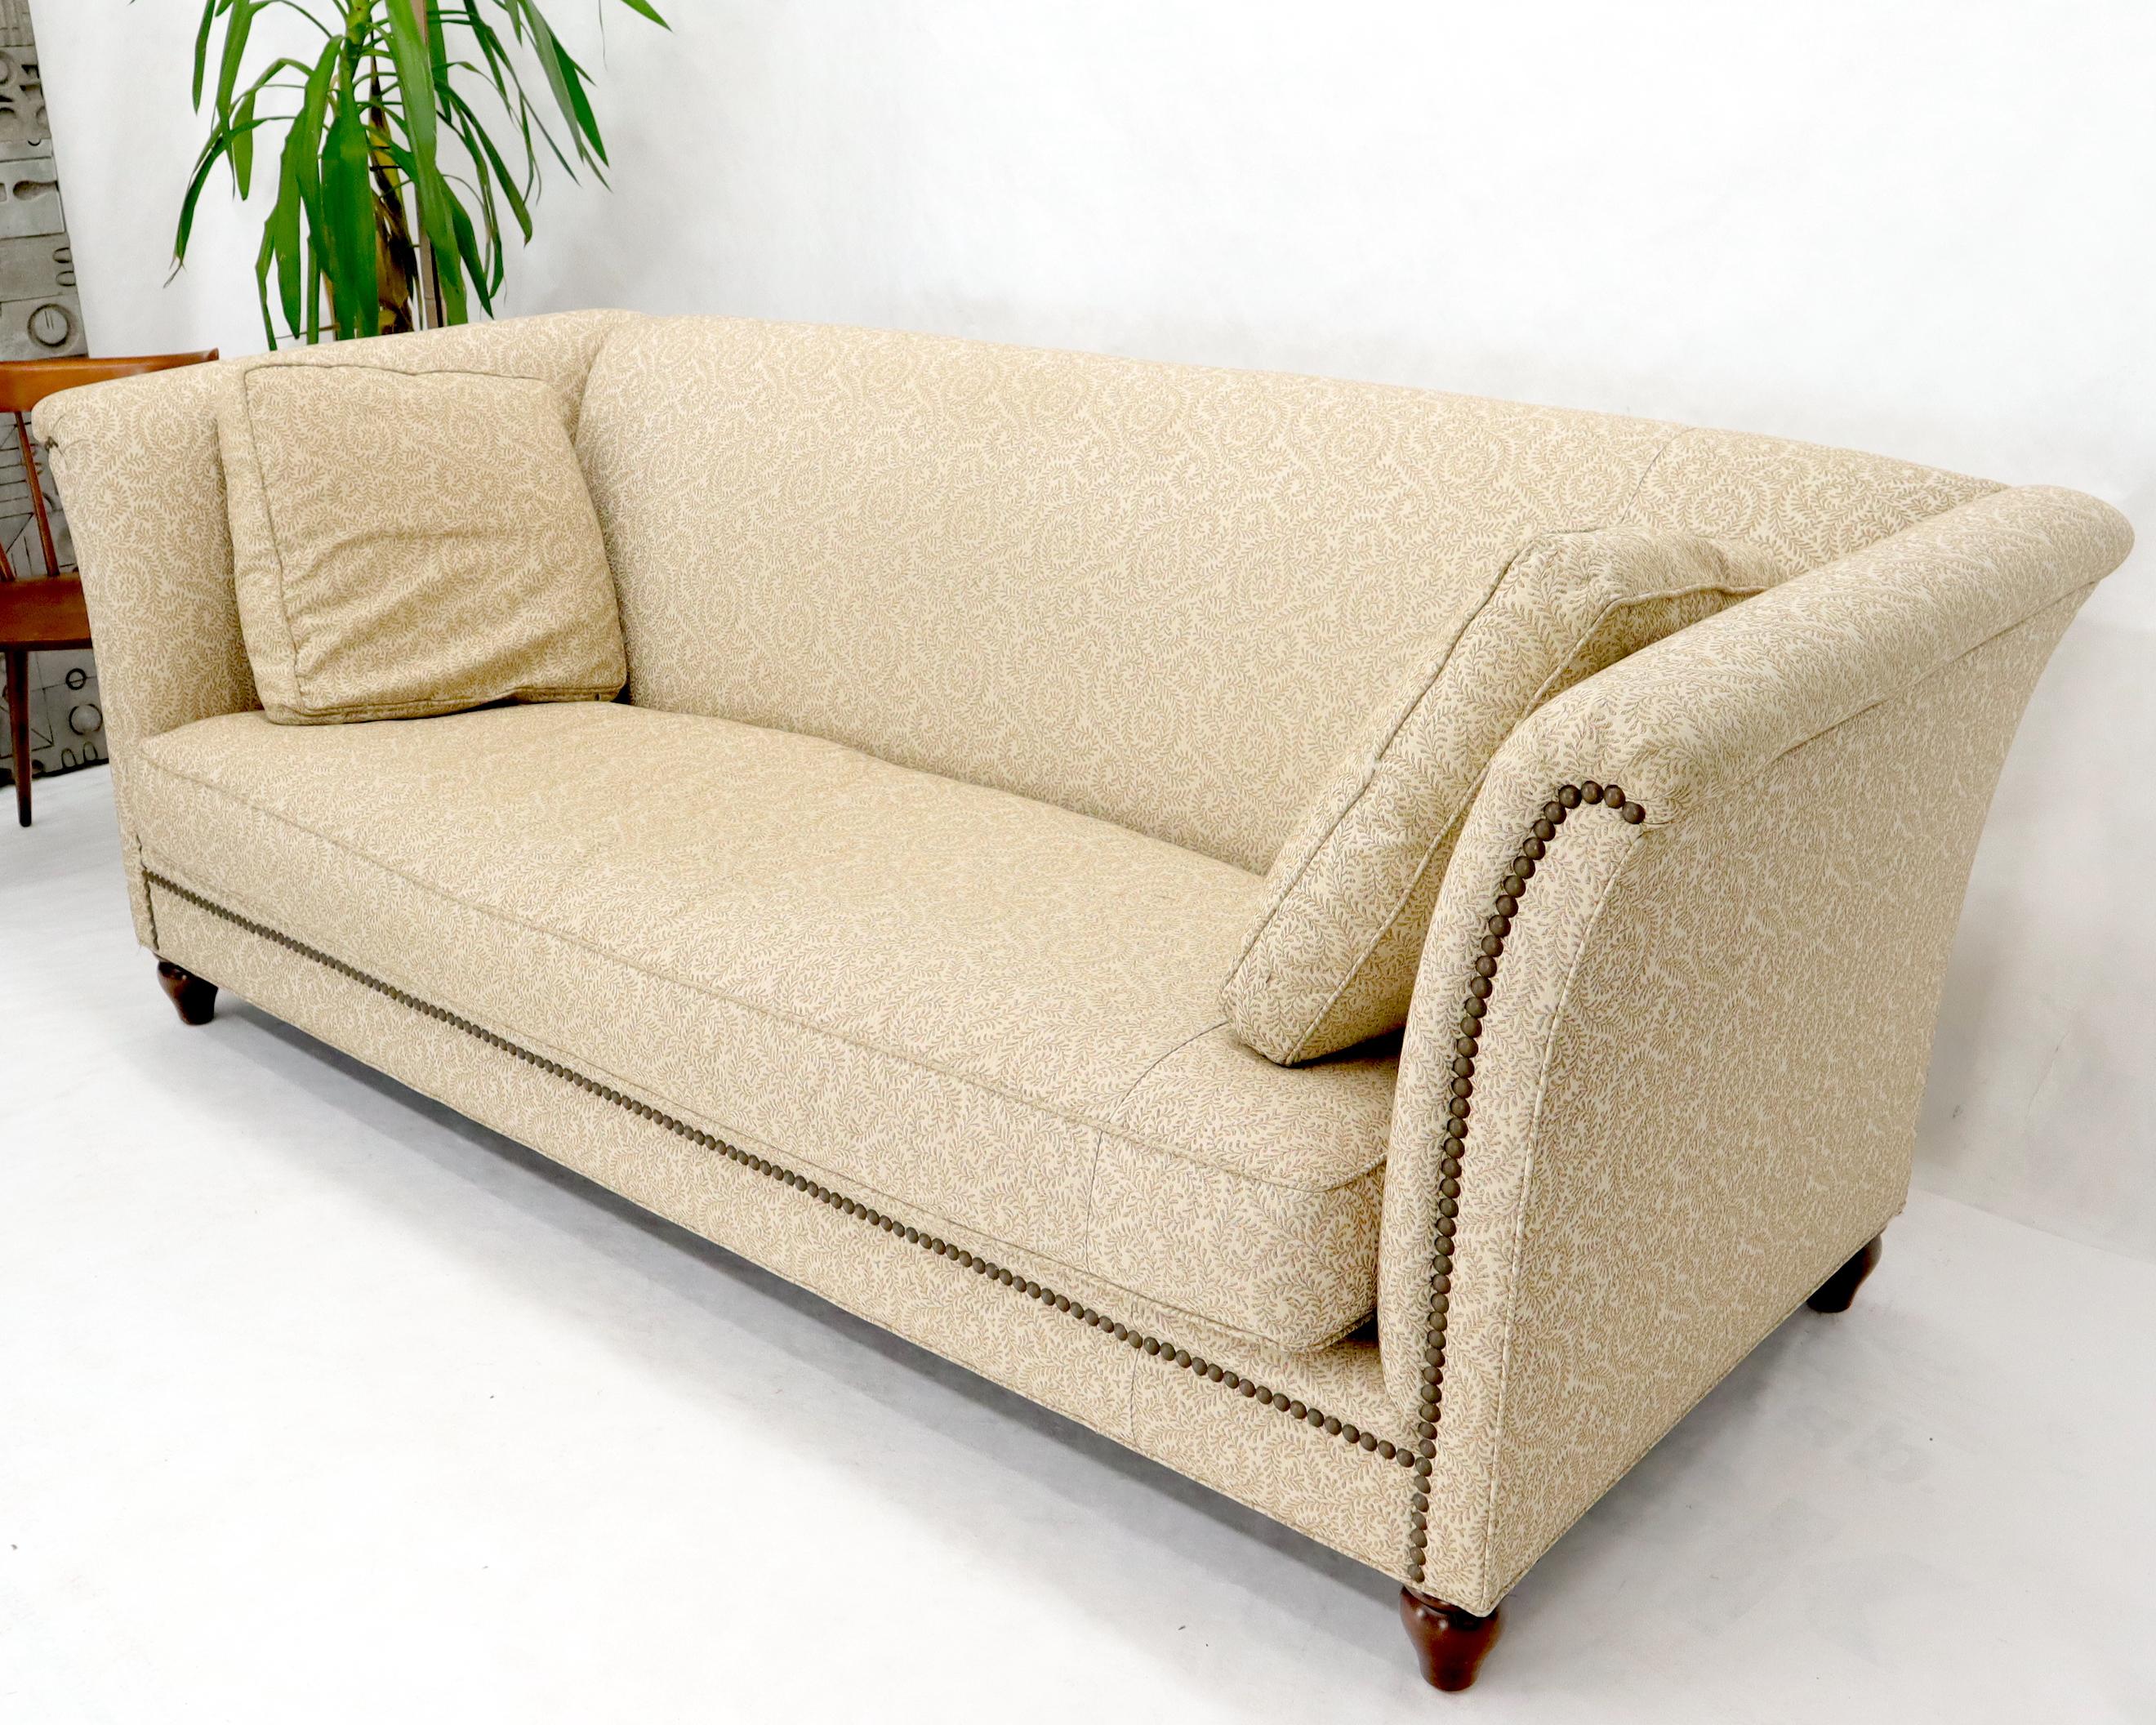 Vintage high arms down filled sofa. Very comfortable.